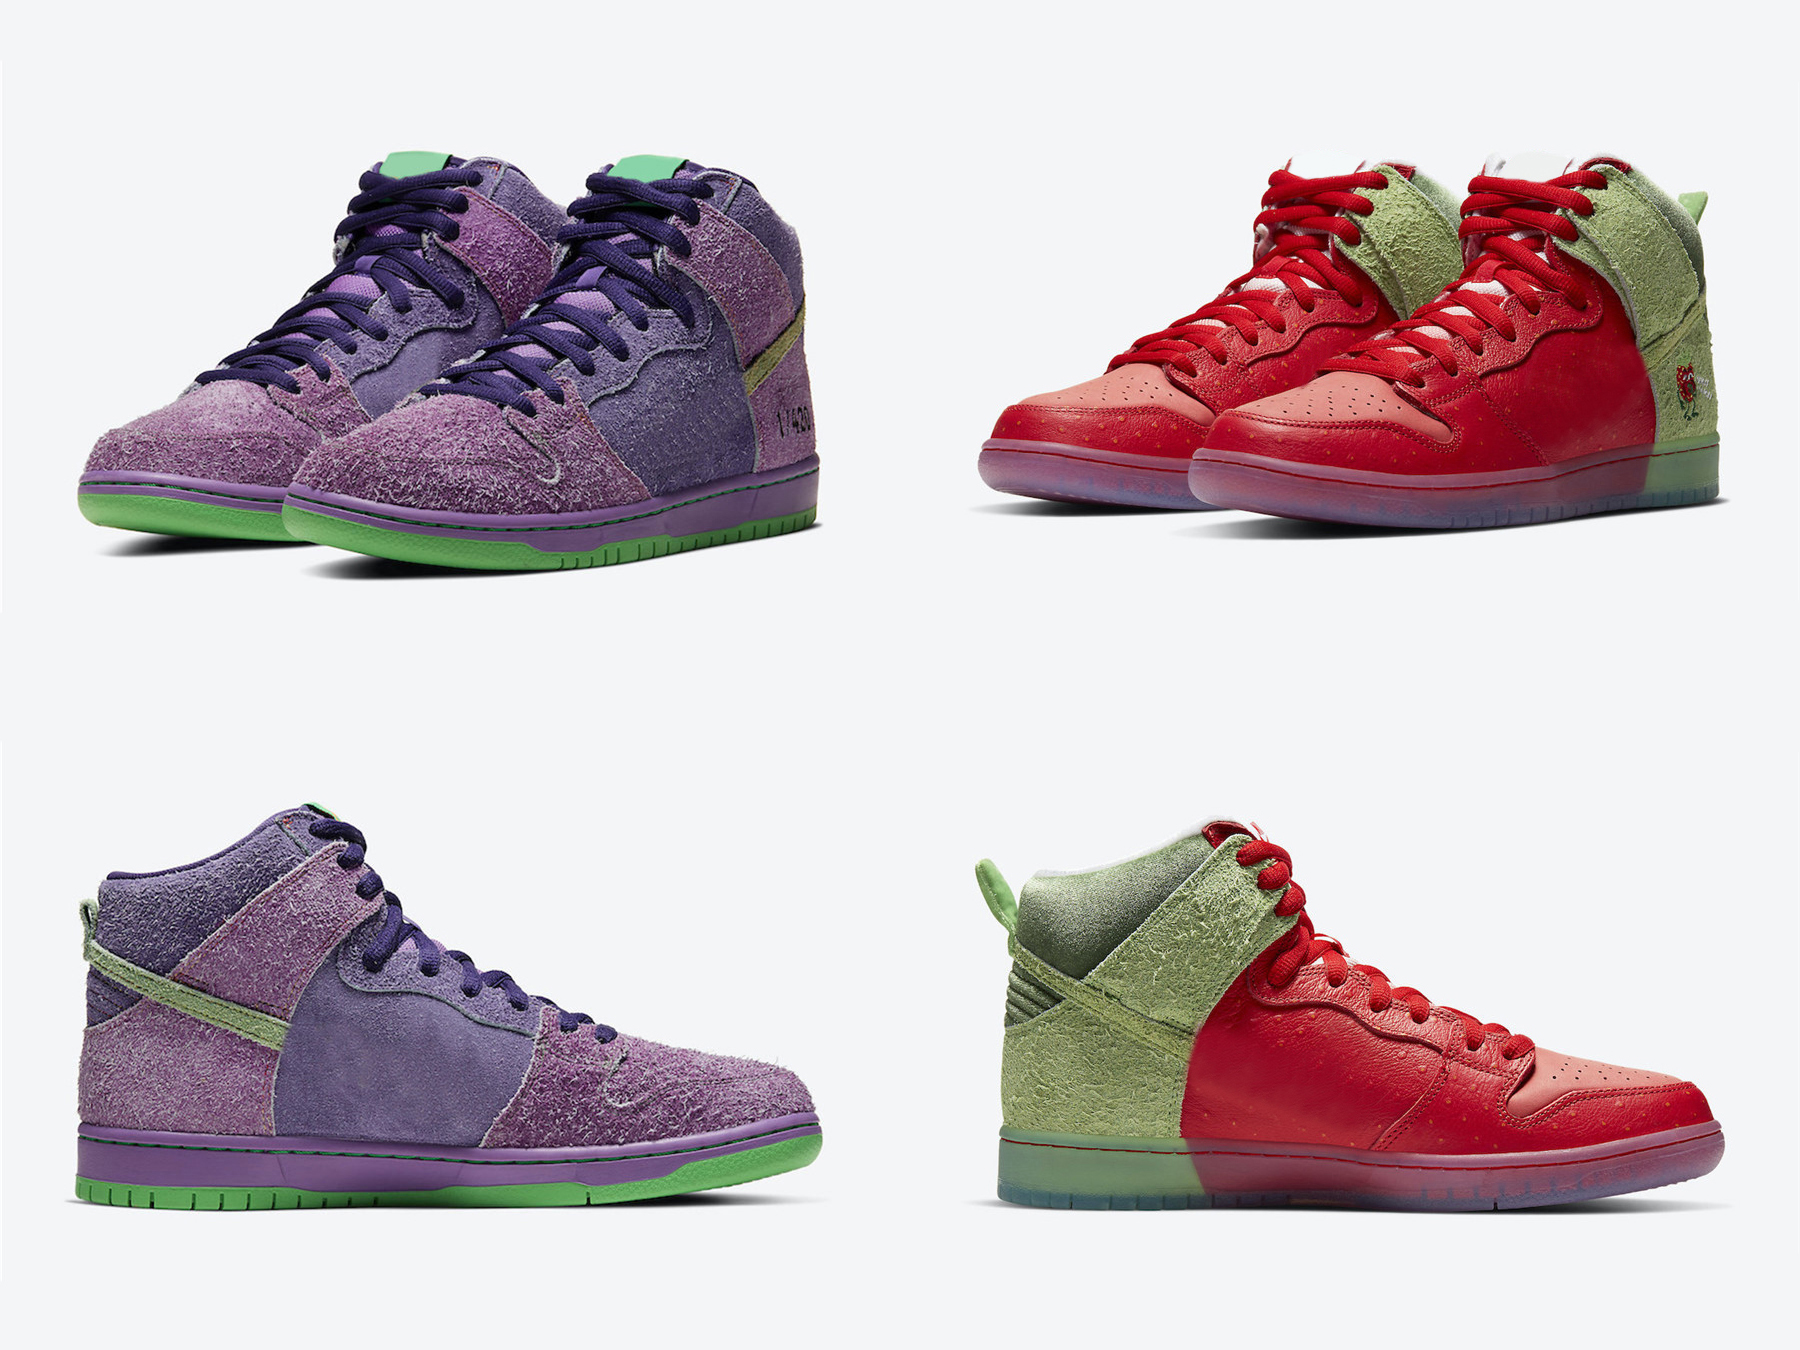 

Authentic Dunk High Pro SB Reverse Skunk Purple Strawberry Cough Men Shoes University Red Spinach Green Magic Ember Outdoor Sports Sneakers With Original Box US5-12, Customize